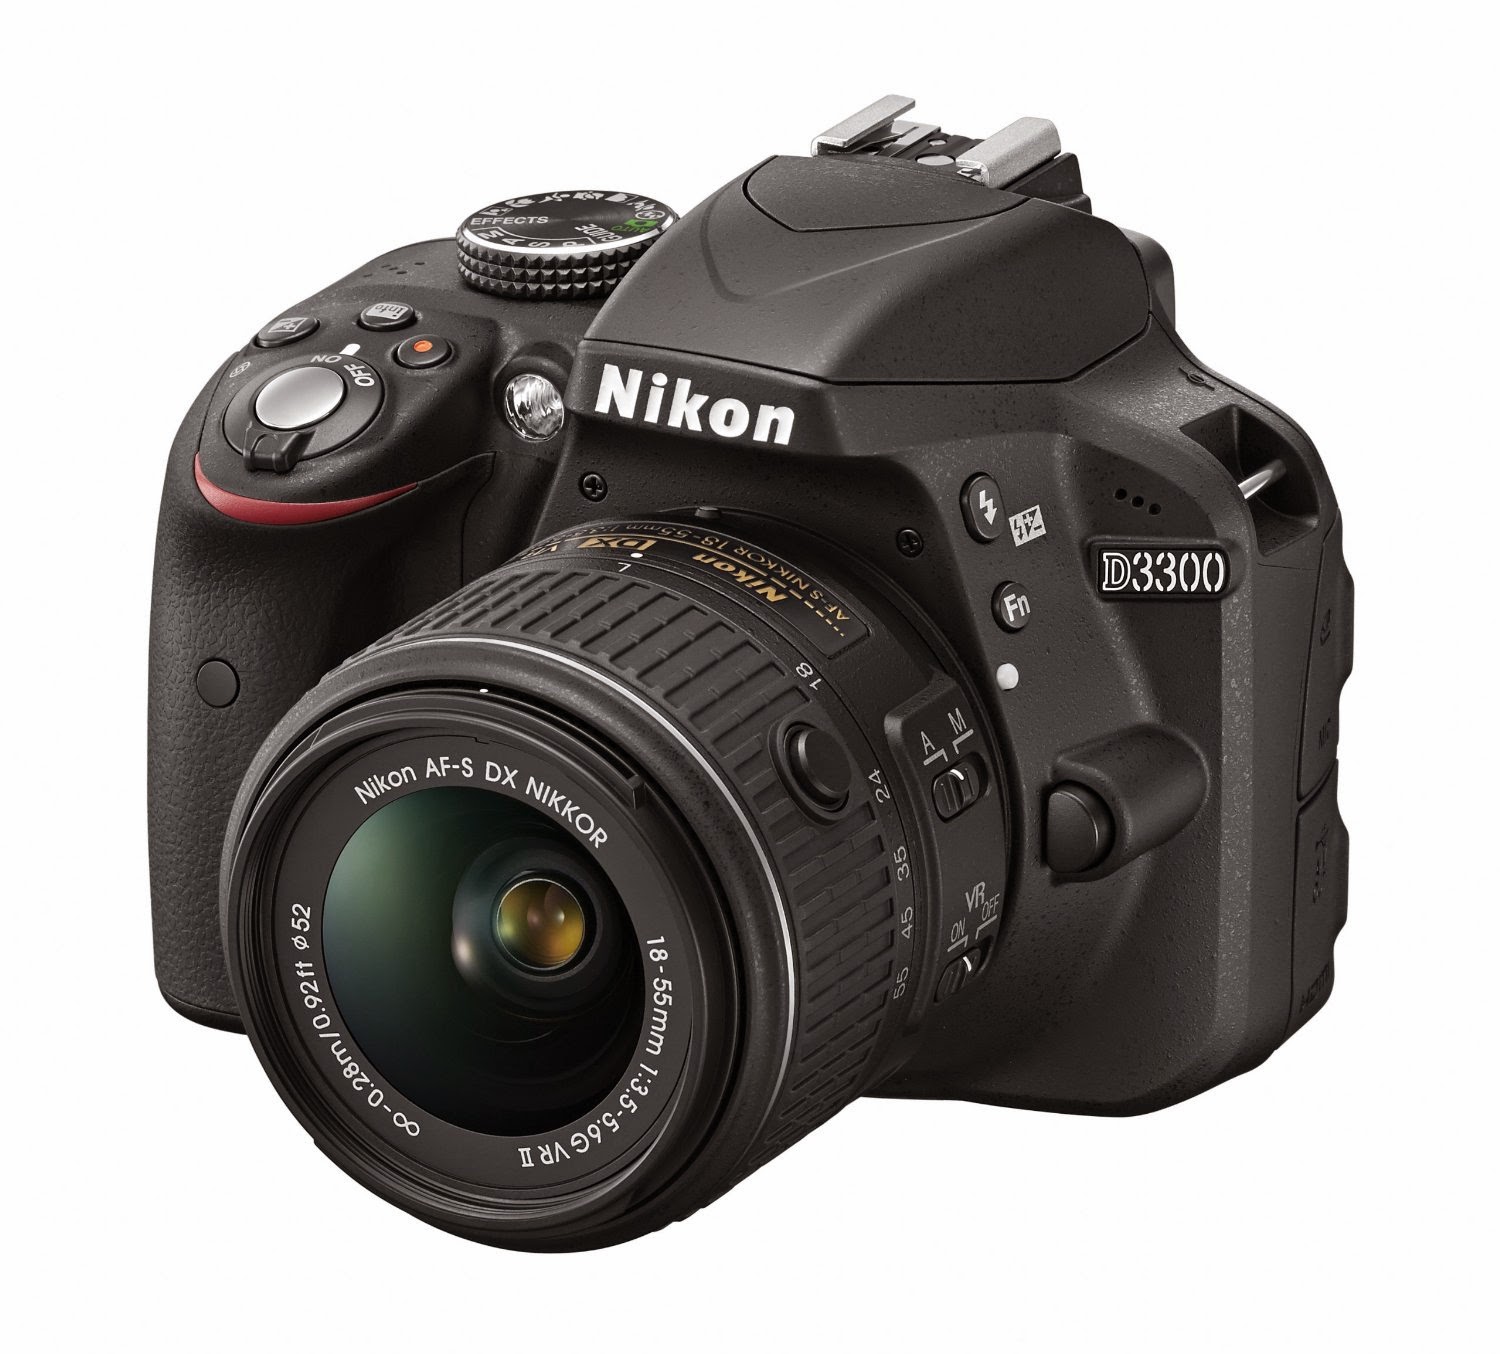 Nikkon D3300 24MP CMOS DX-format DSLR camera, review plus compare with Nikon D3200, Nikon D3300 has no optical low pass filter, higher ISO range, better processor, improved battery life, smaller & lighter